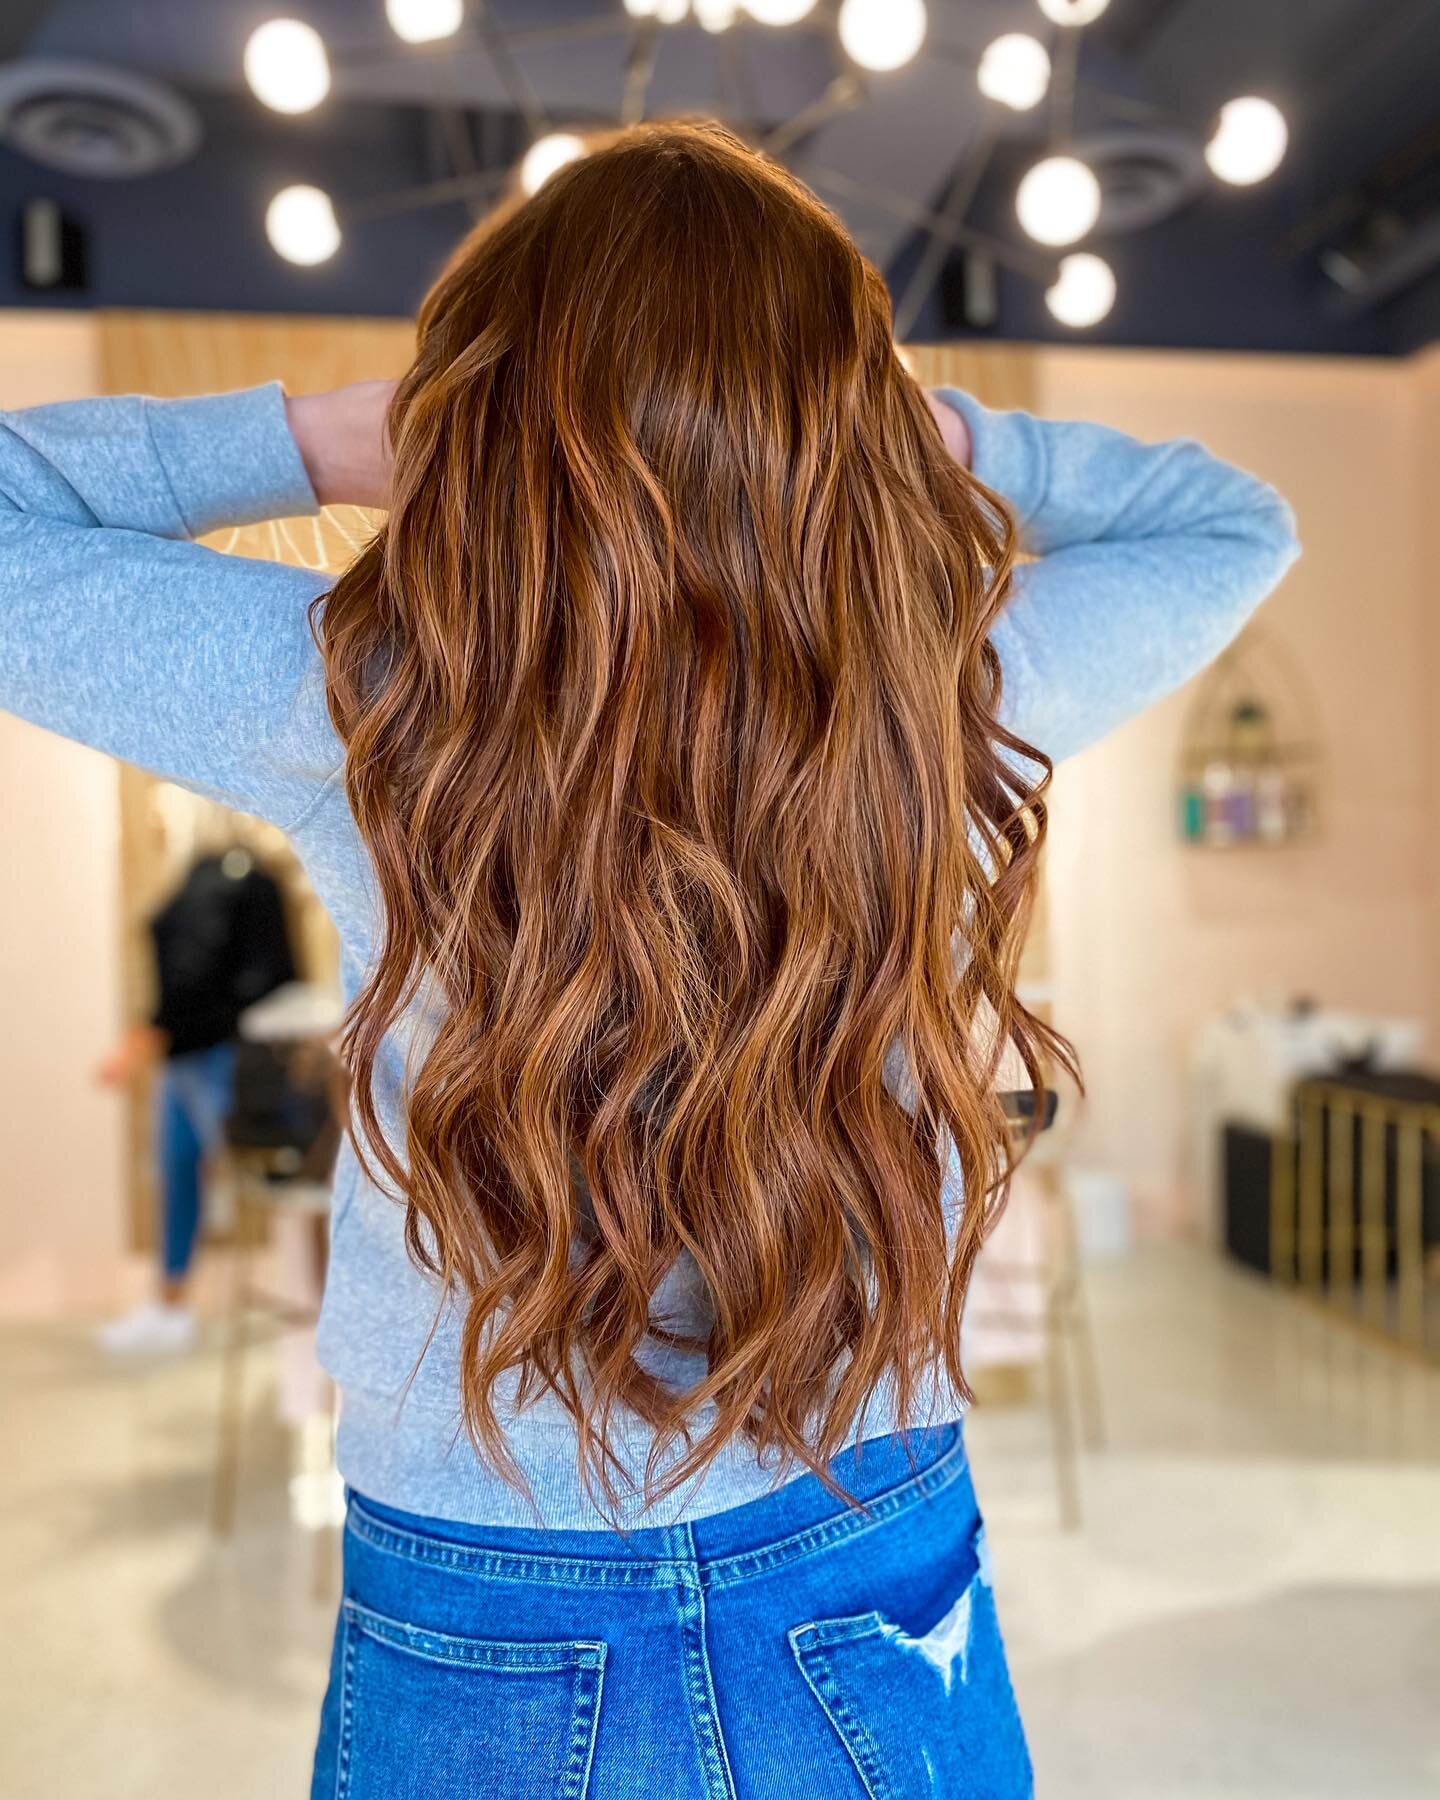 22&rsquo; of  @habitextensionmethod are what dreams are made of ❤️✨ 🔥